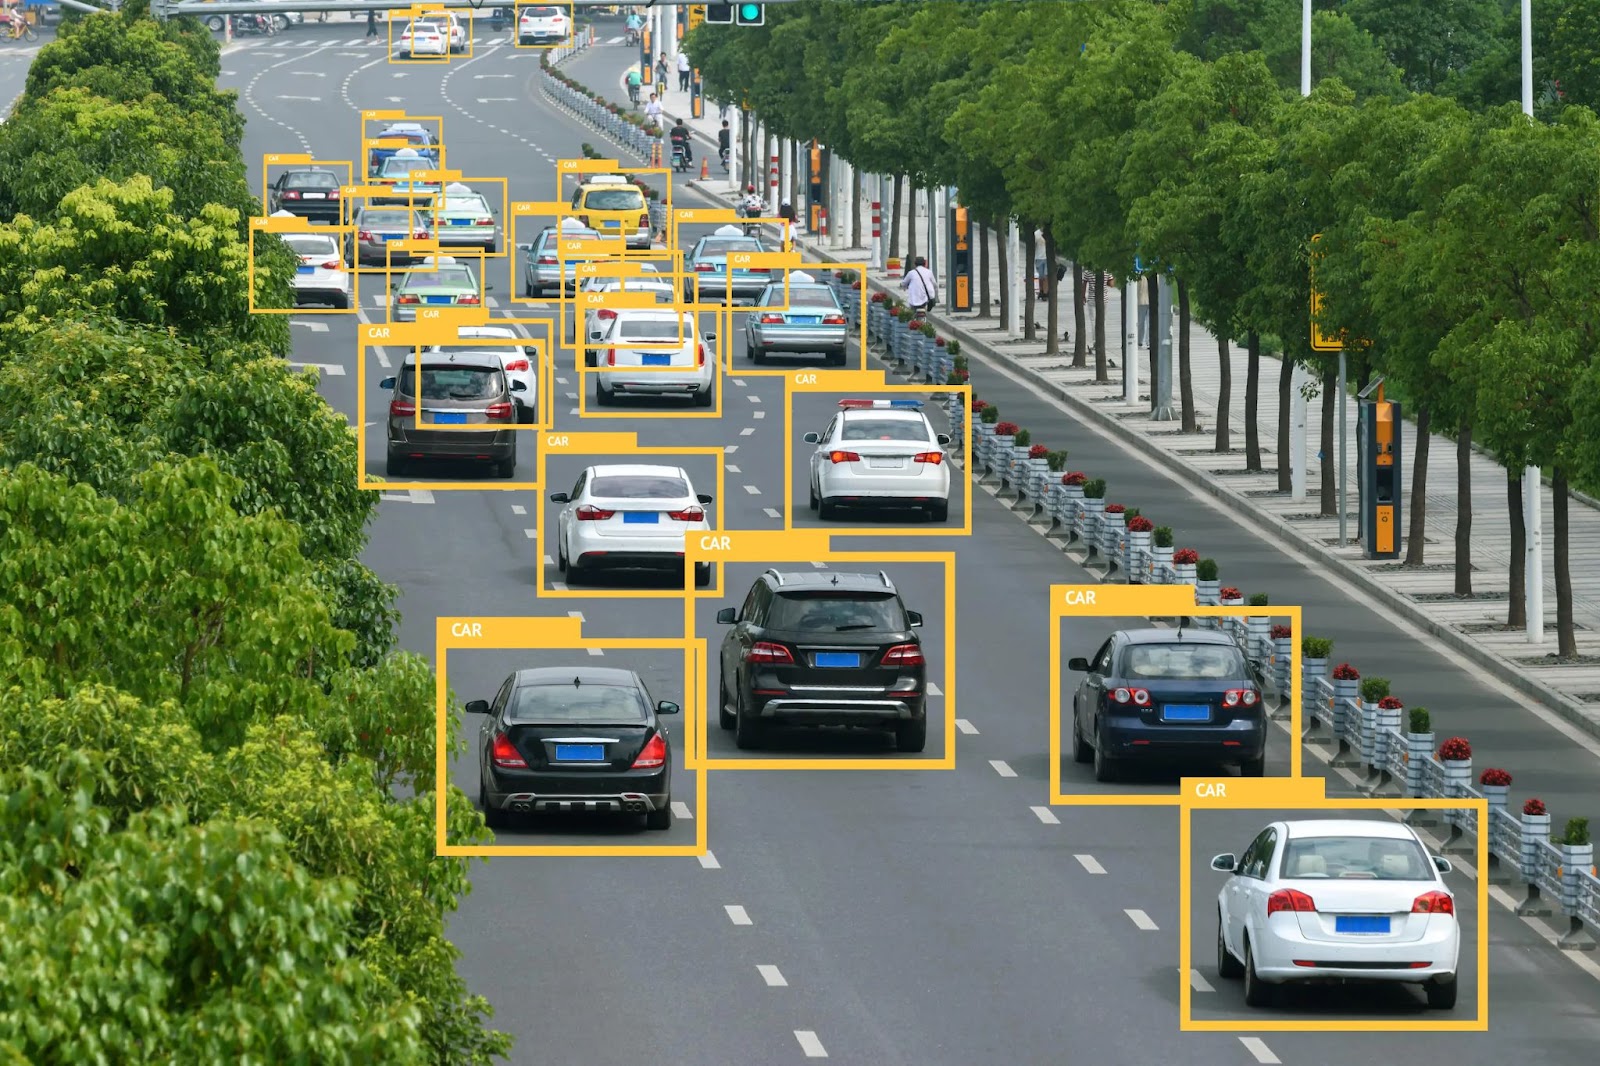 Object Detection being used to monitor traffic